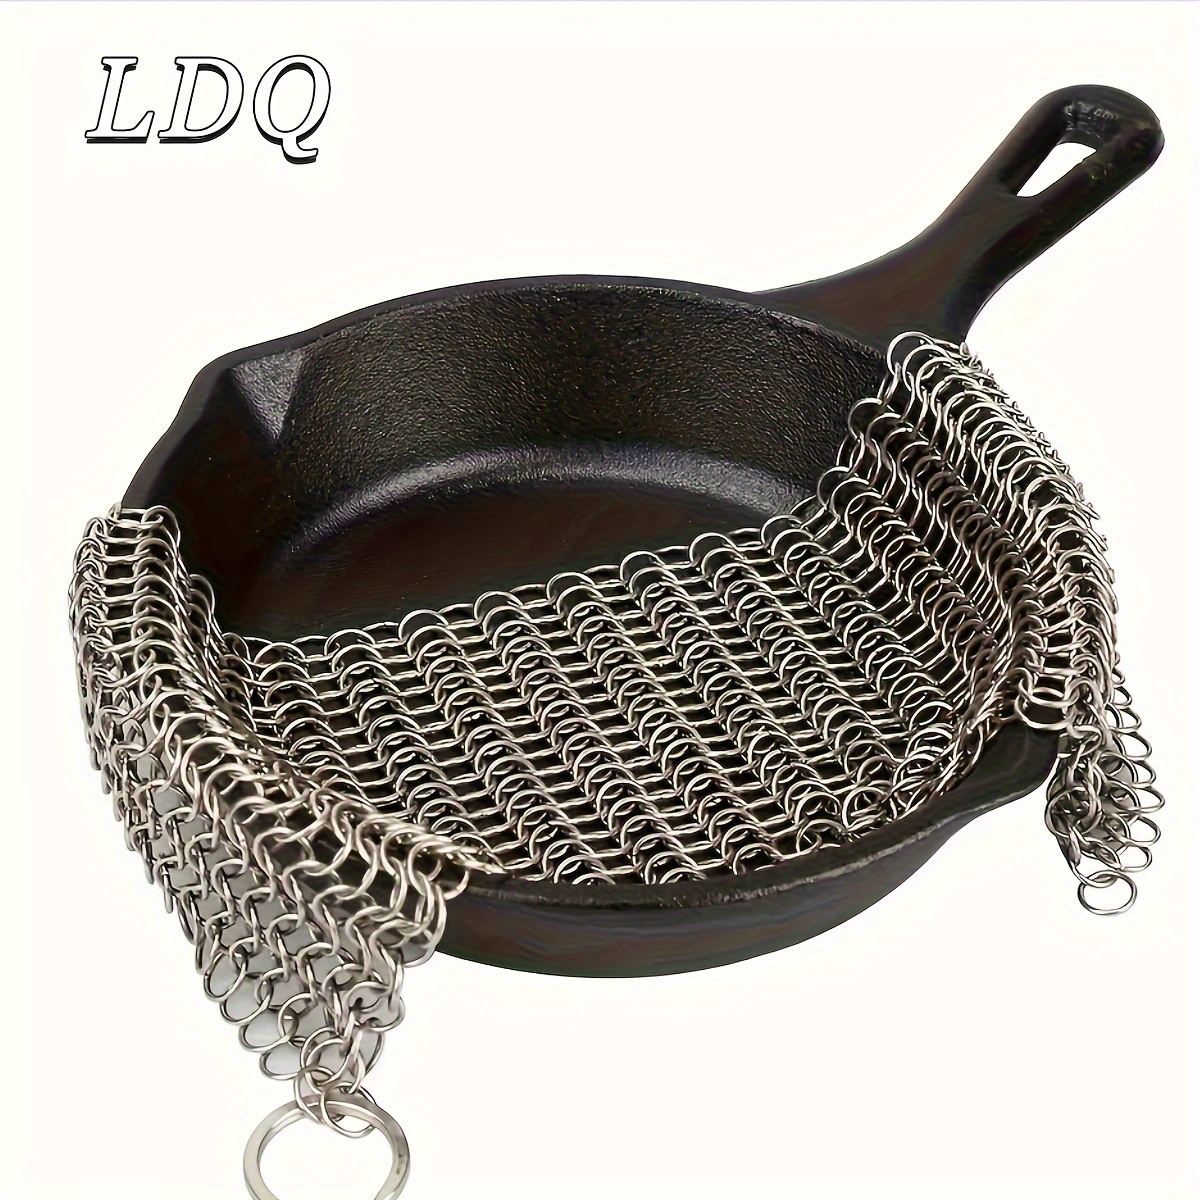 

1pc 316 Stainless Steel Pot Washing Mesh - The Ultimate Pan Brush For Cleaning Cups & Dishes For Restaurant